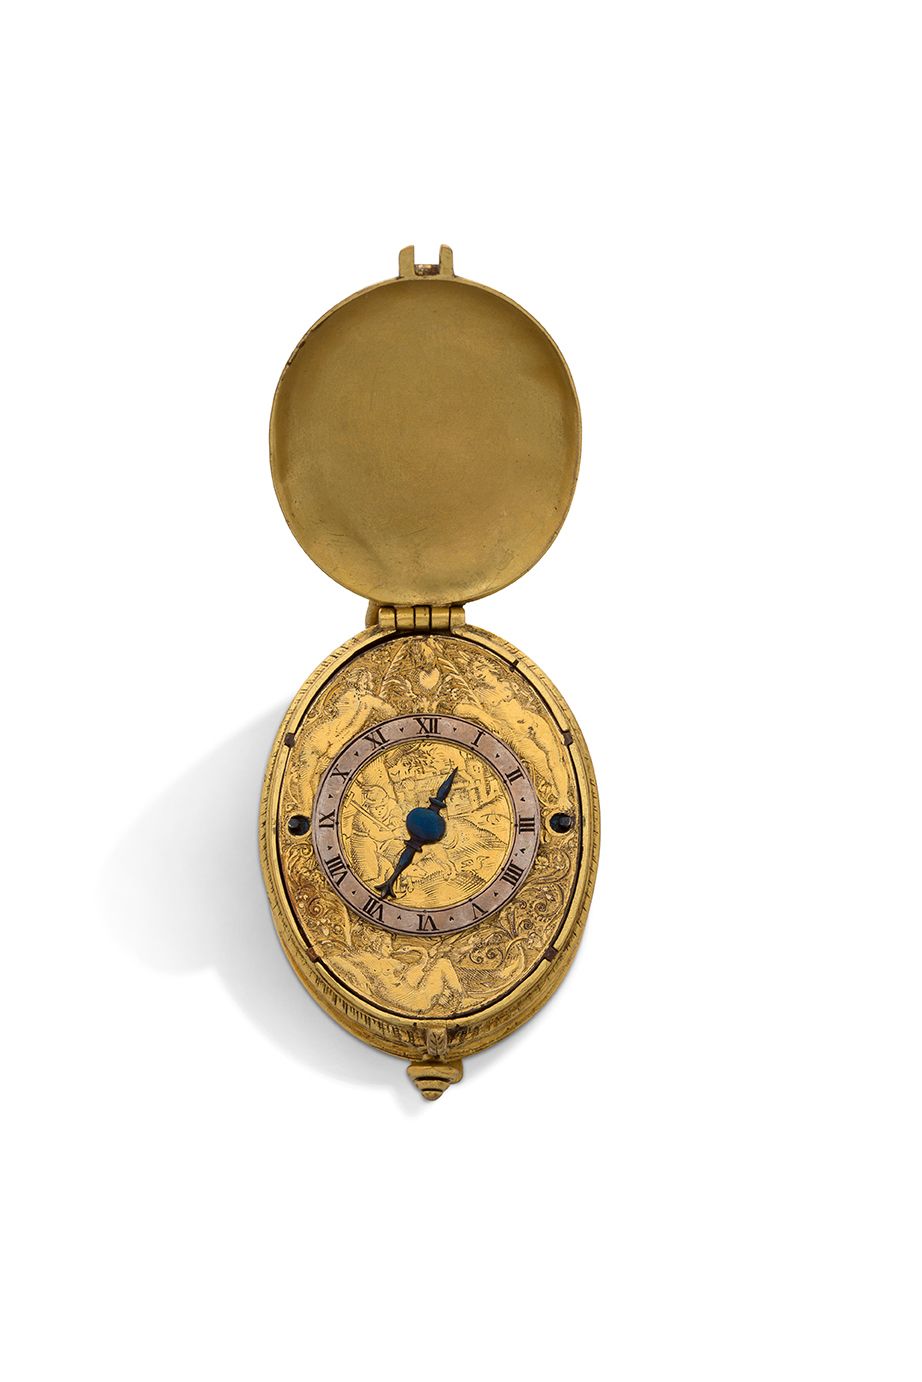 J CROYMARIE, au Puy 
Puritan" watch in gilded metal with a single hand



Oval c&hellip;